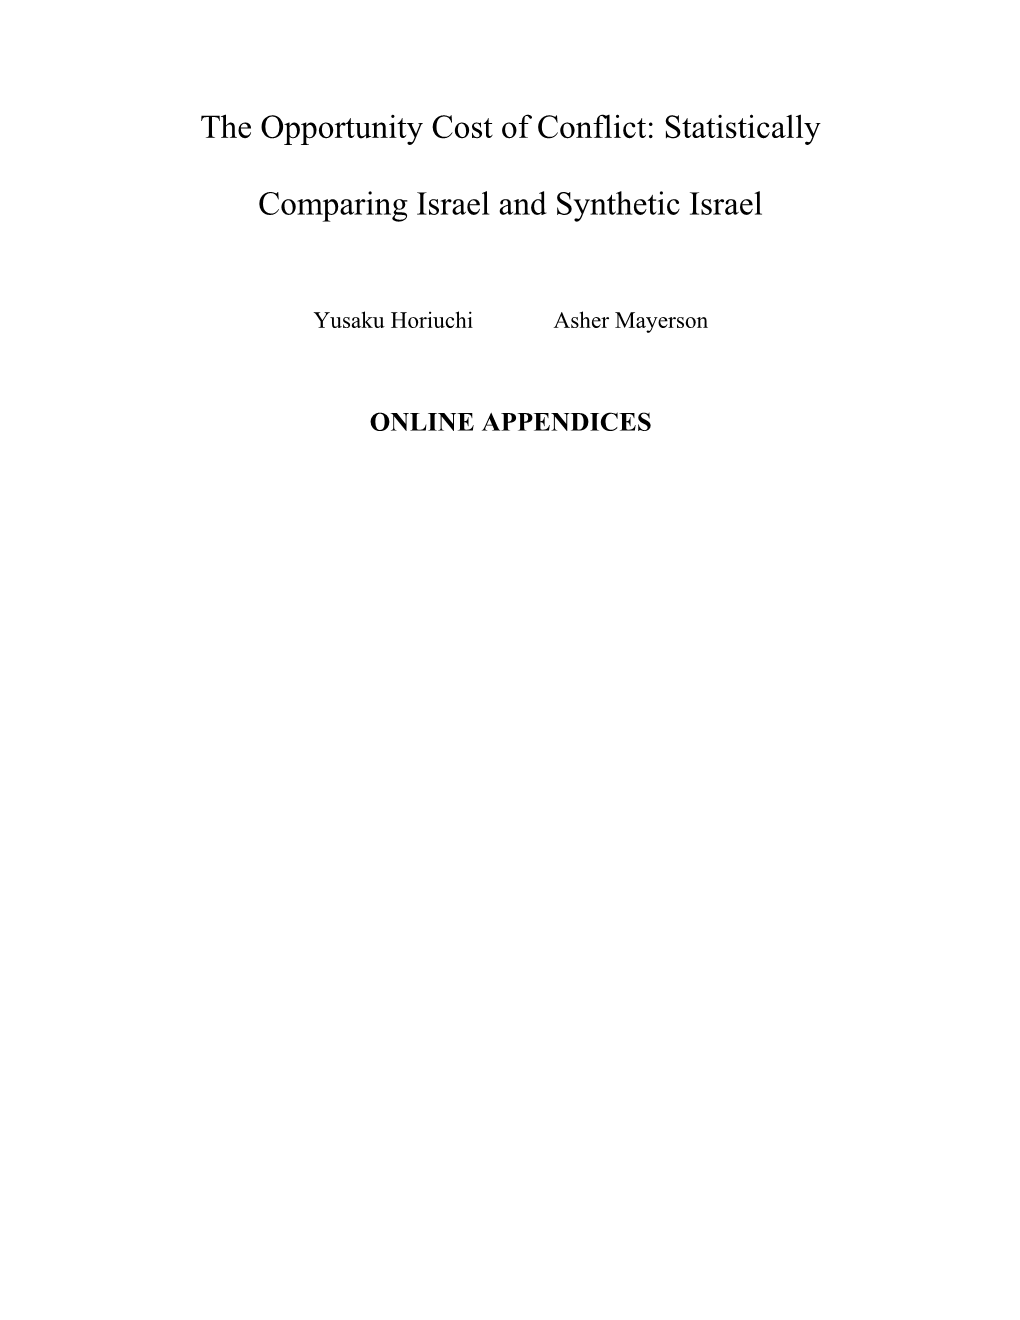 The Opportunitycost of Conflict: Statistically Comparing Israel and Synthetic Israel